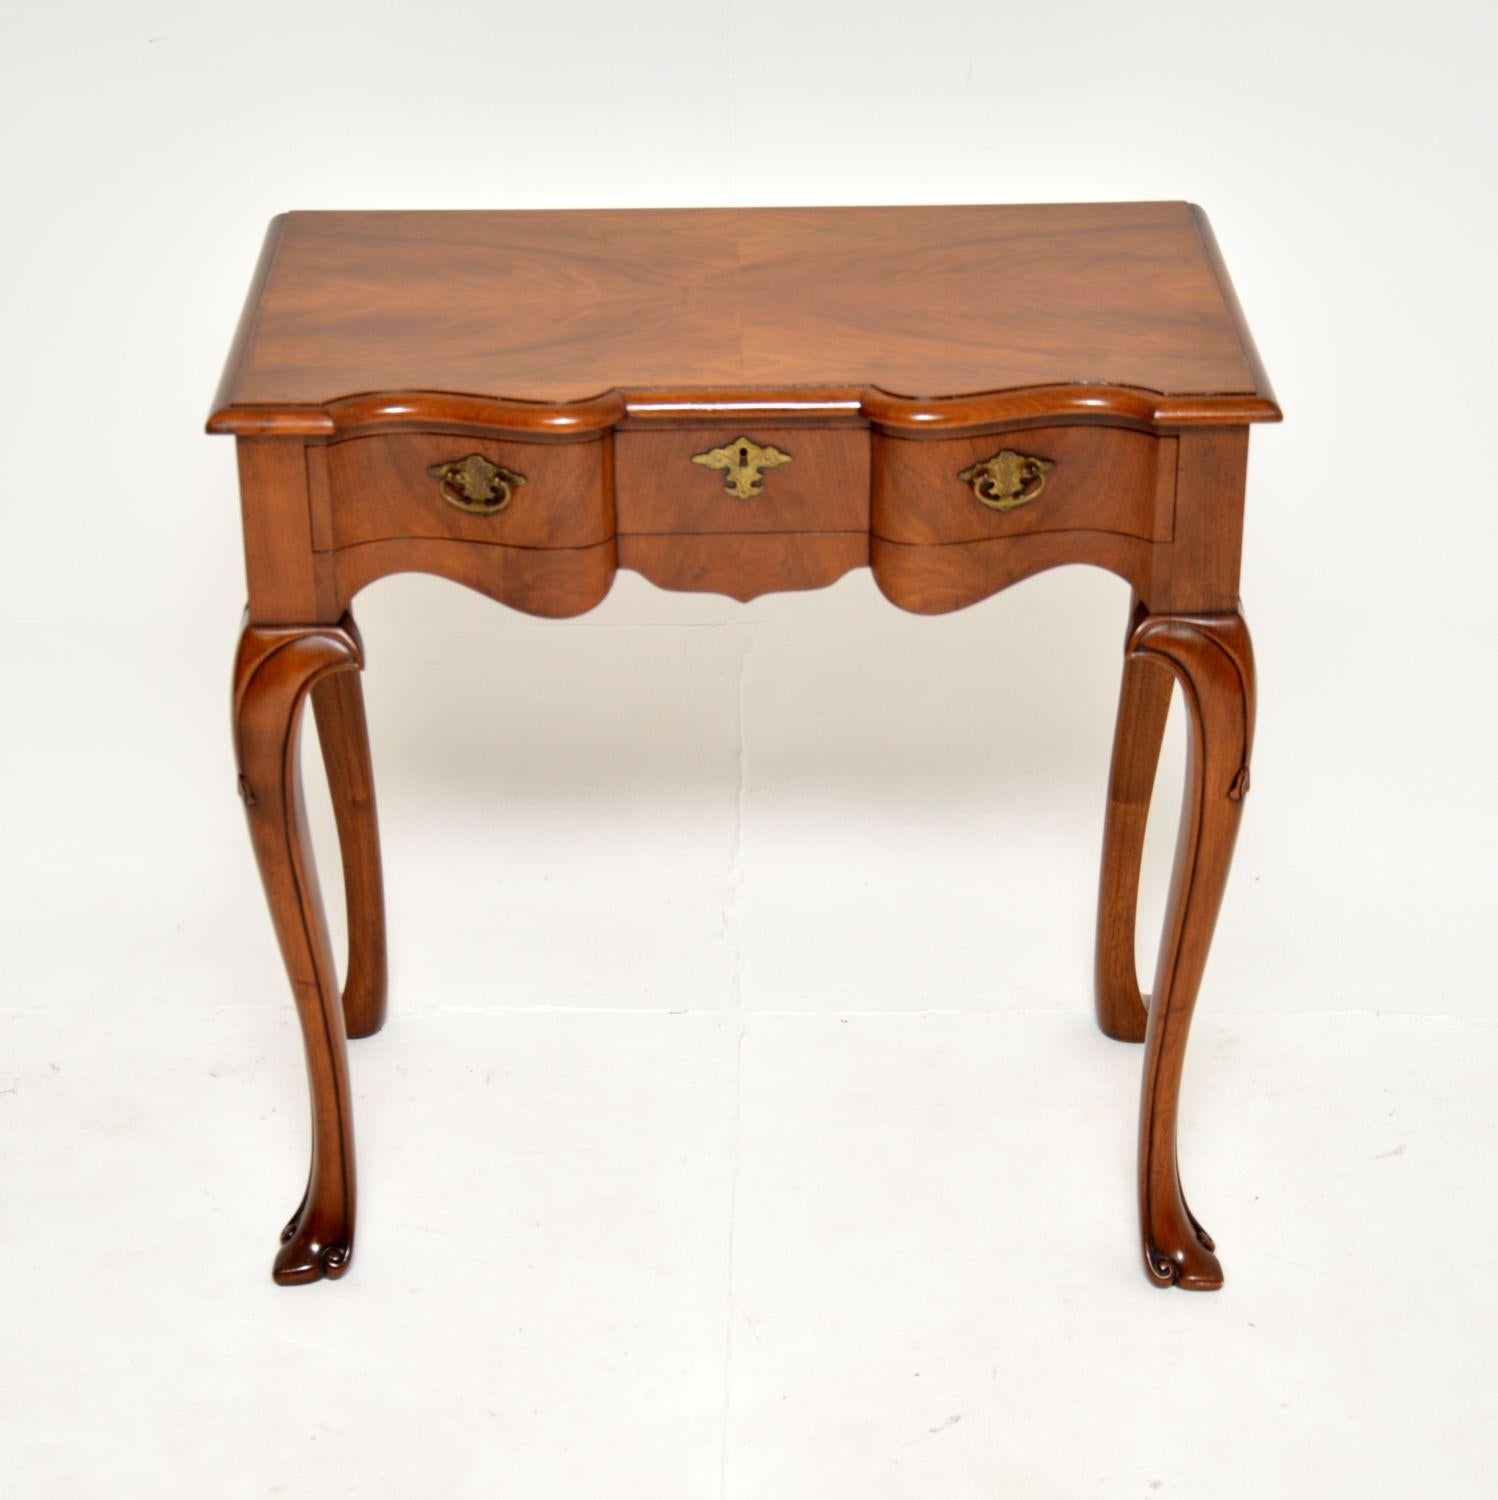 A beautiful and very useful antique walnut side table. This was made in England, it dates from around the 1930’s.

The quality is absolutely amazing, this is extremely well built and is a very practical size. The double serpentine shaped top sits